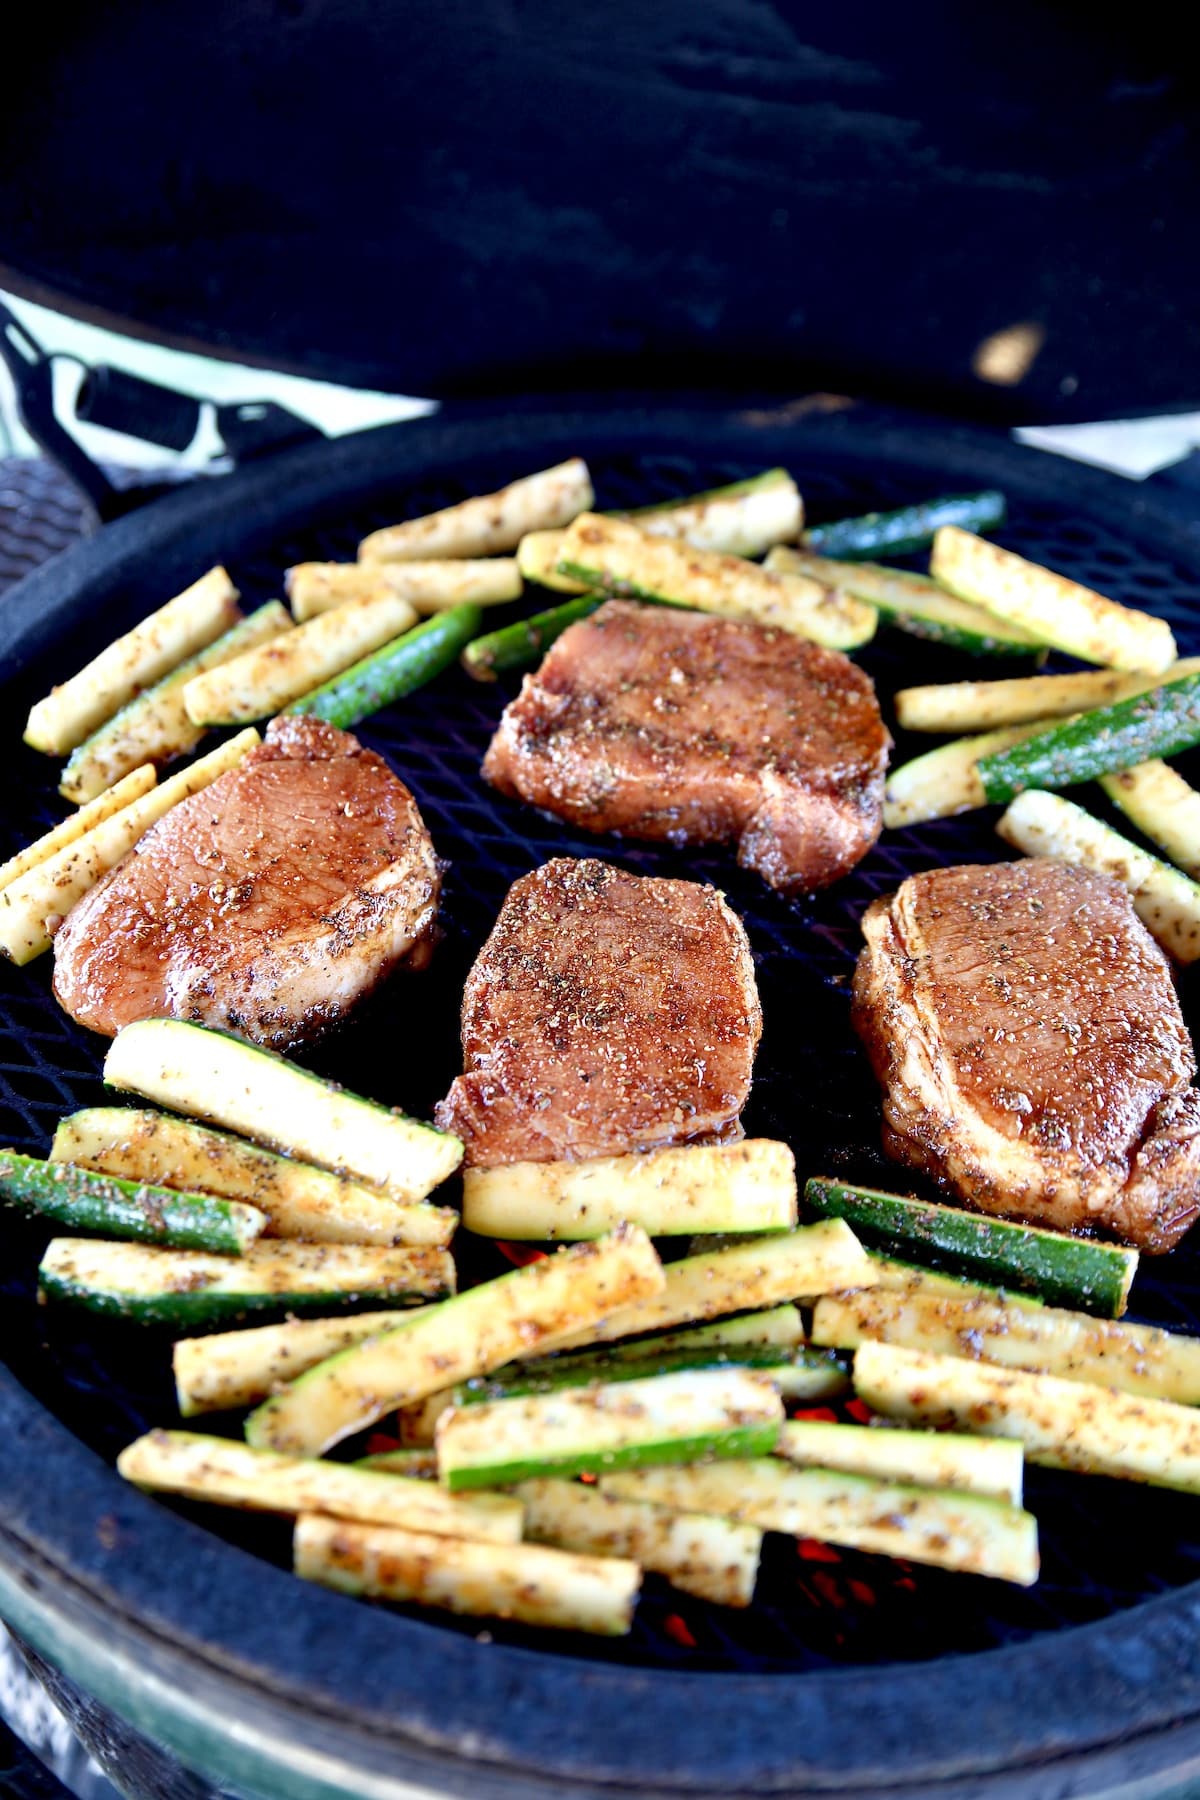 Grilling pork chops and zucchini wedges.